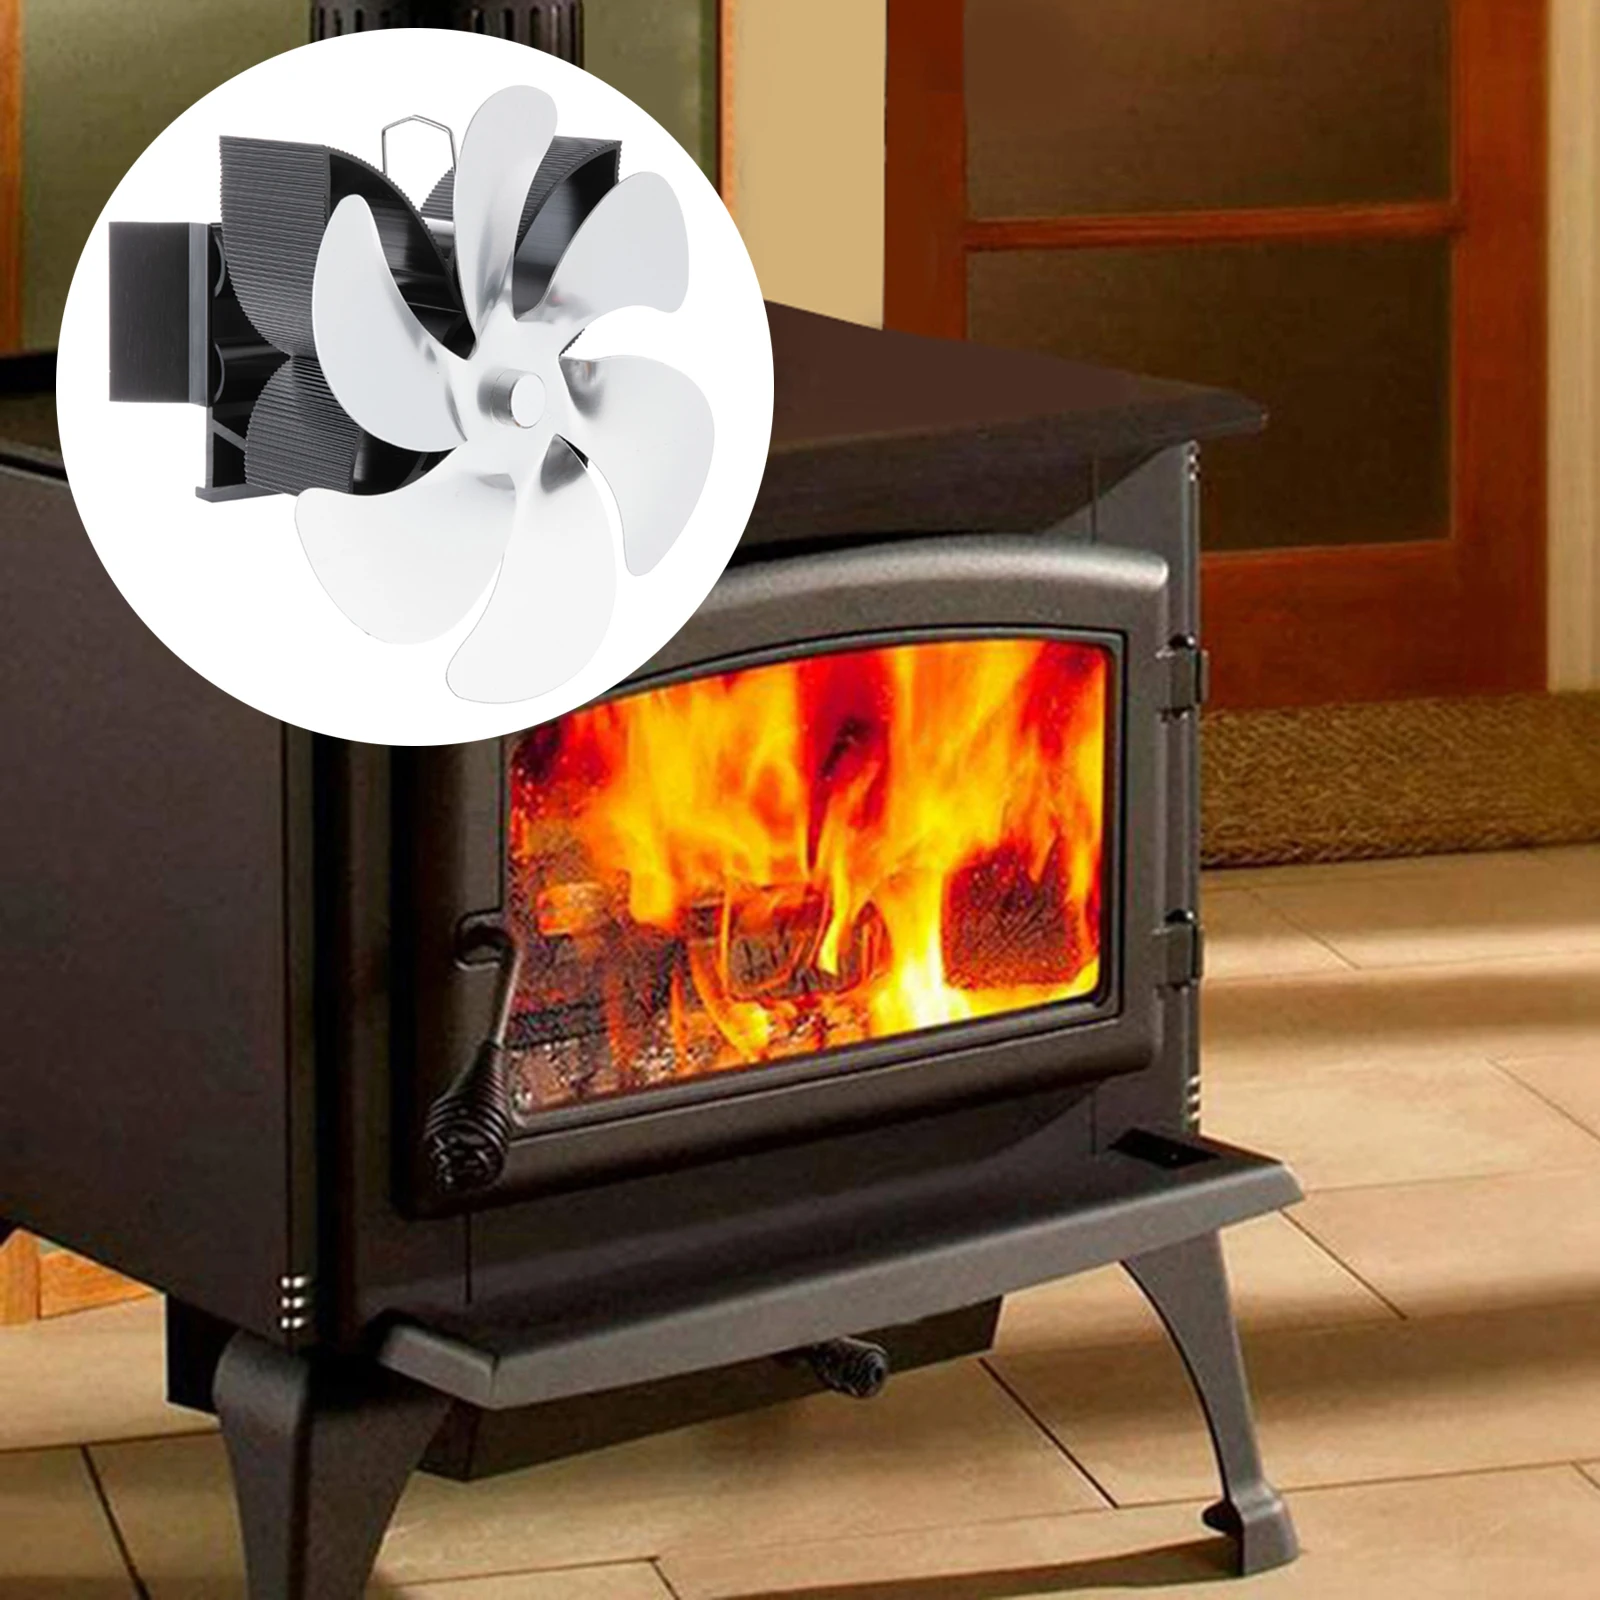 6 Blades Aluminum Alloy Heat Powered Fireplace Hanging Stove Fan for Eco Friendly Wood/Log Burner Saving Fuel Efficiently